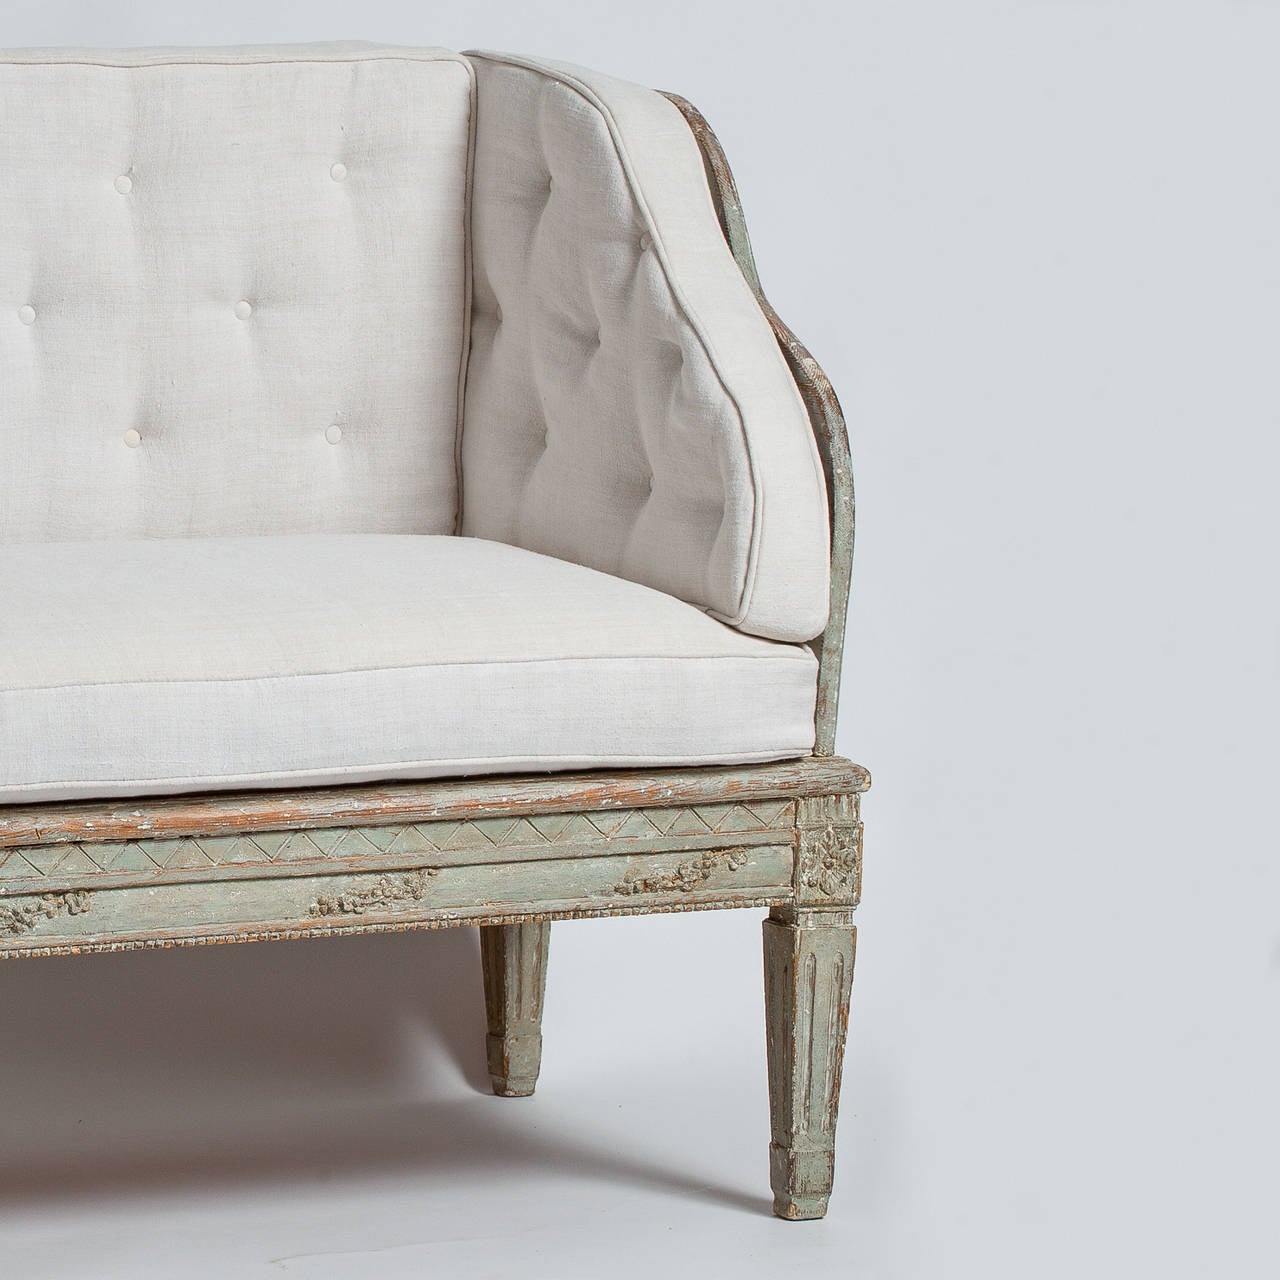 This Swedish, Gustavian period "Trågsoffa" retains the original pale blue paint surface with carvings of flowers on the base rail and flower medallions above reeded legs. It has been upholstered in a linen fabric in the original style,